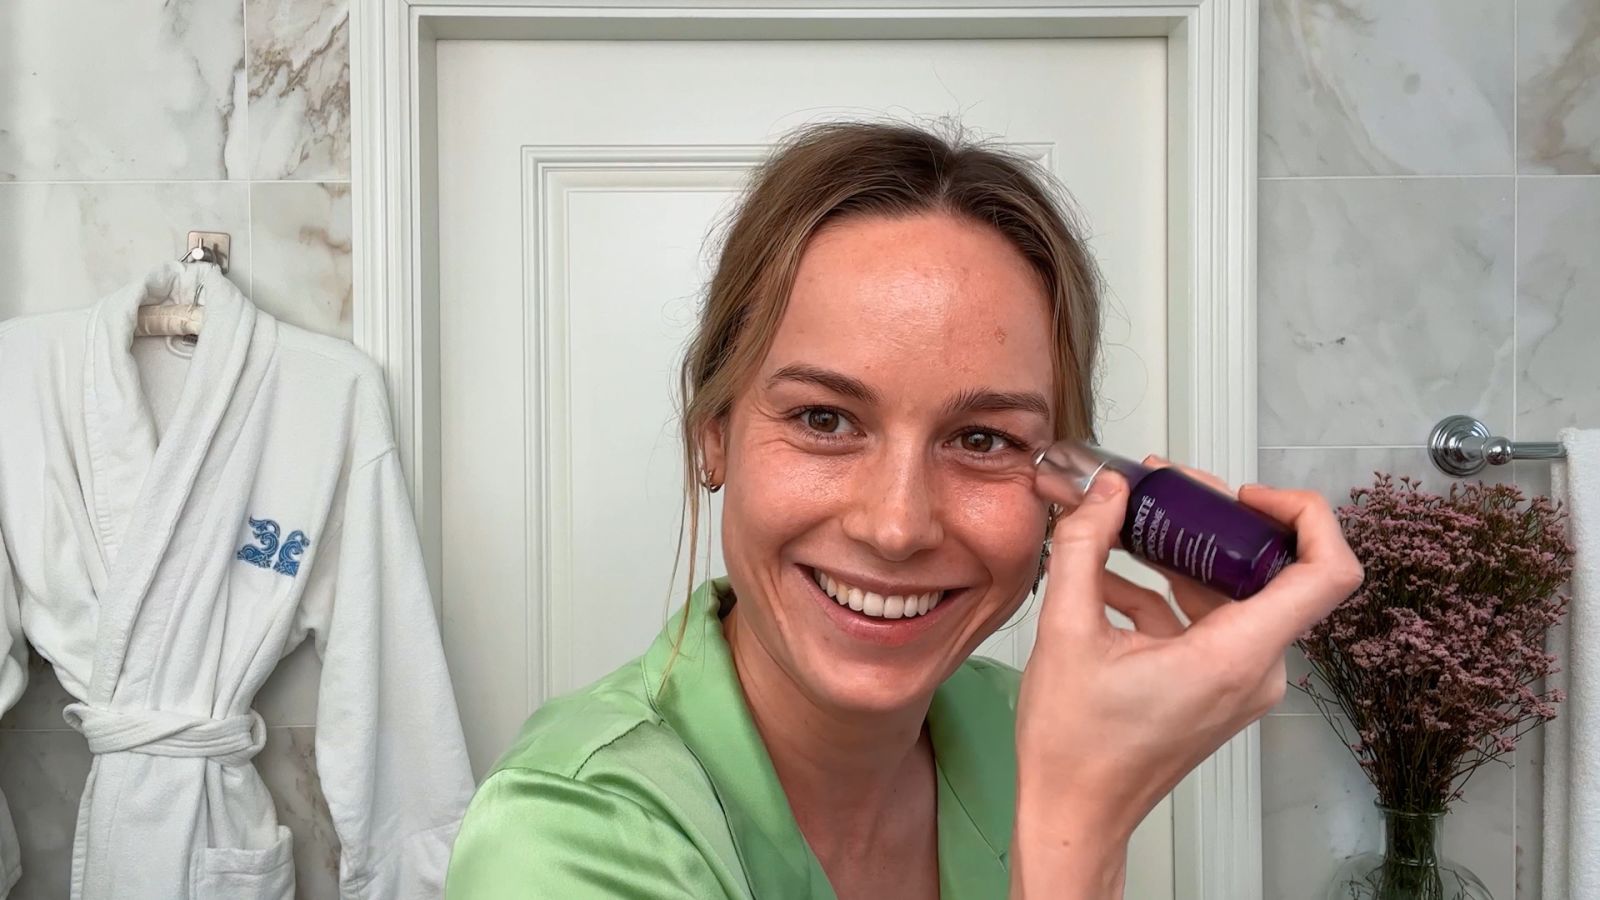 Brie Larson’s Easy Everyday Beauty Routine